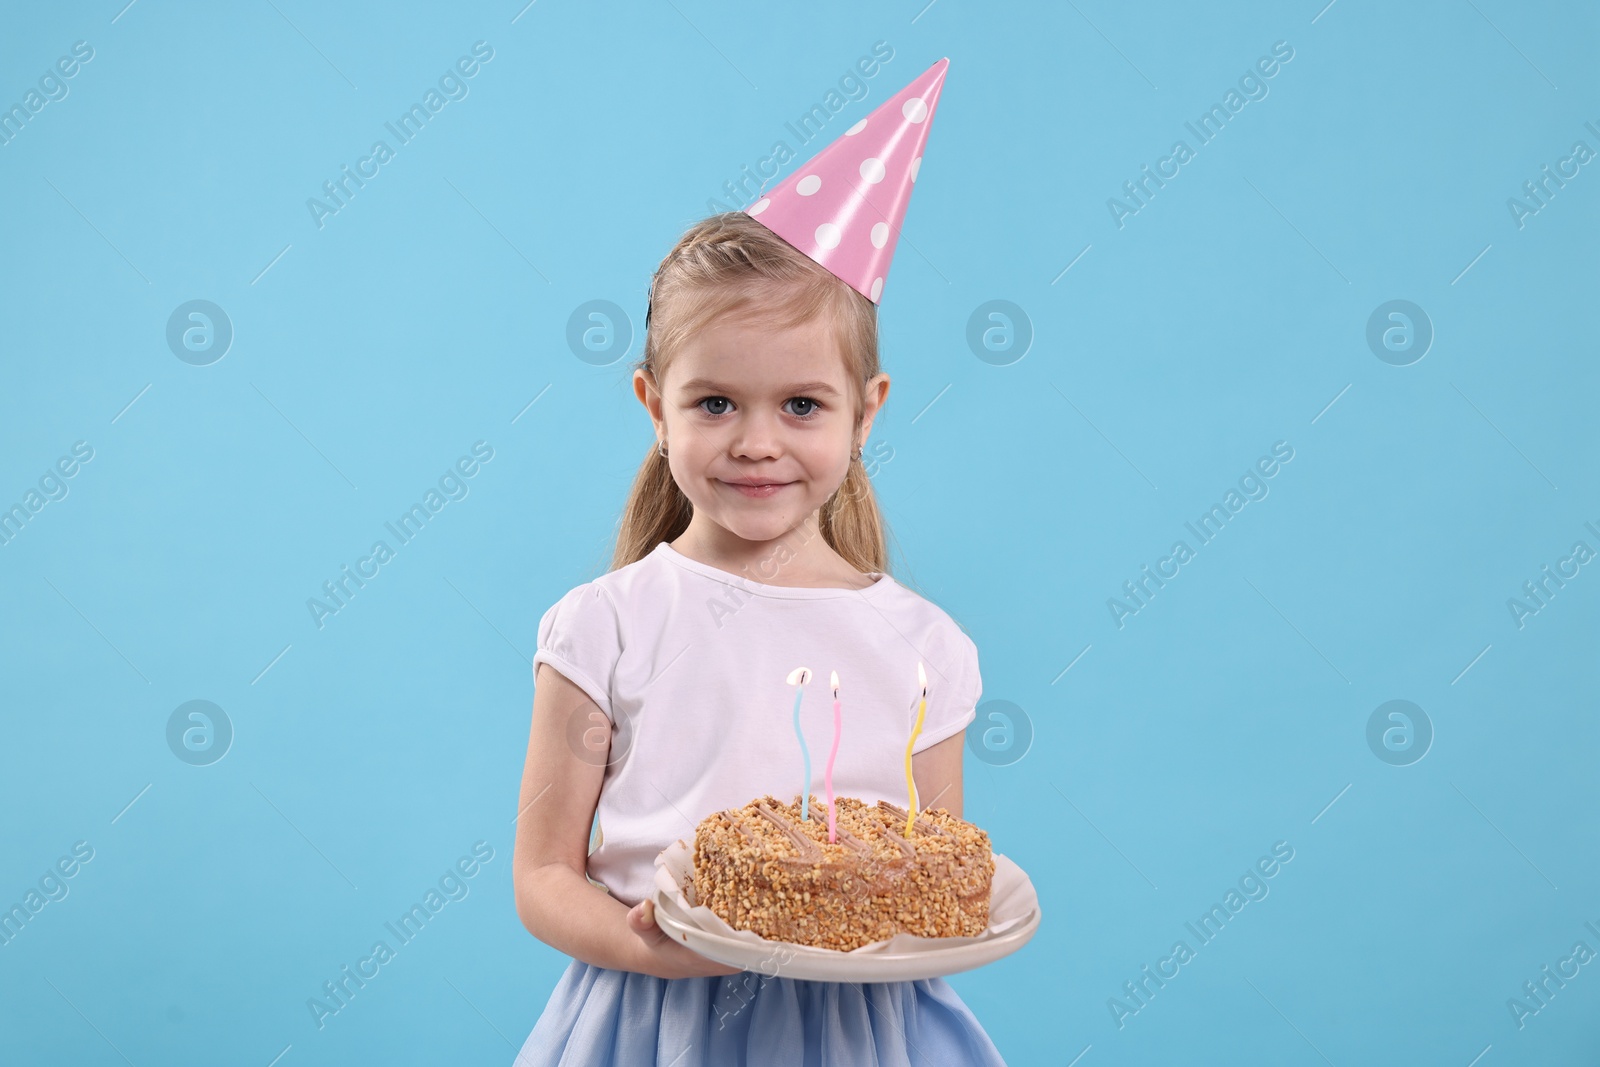 Photo of Birthday celebration. Cute little girl in party hat holding tasty cake with burning candles on light blue background